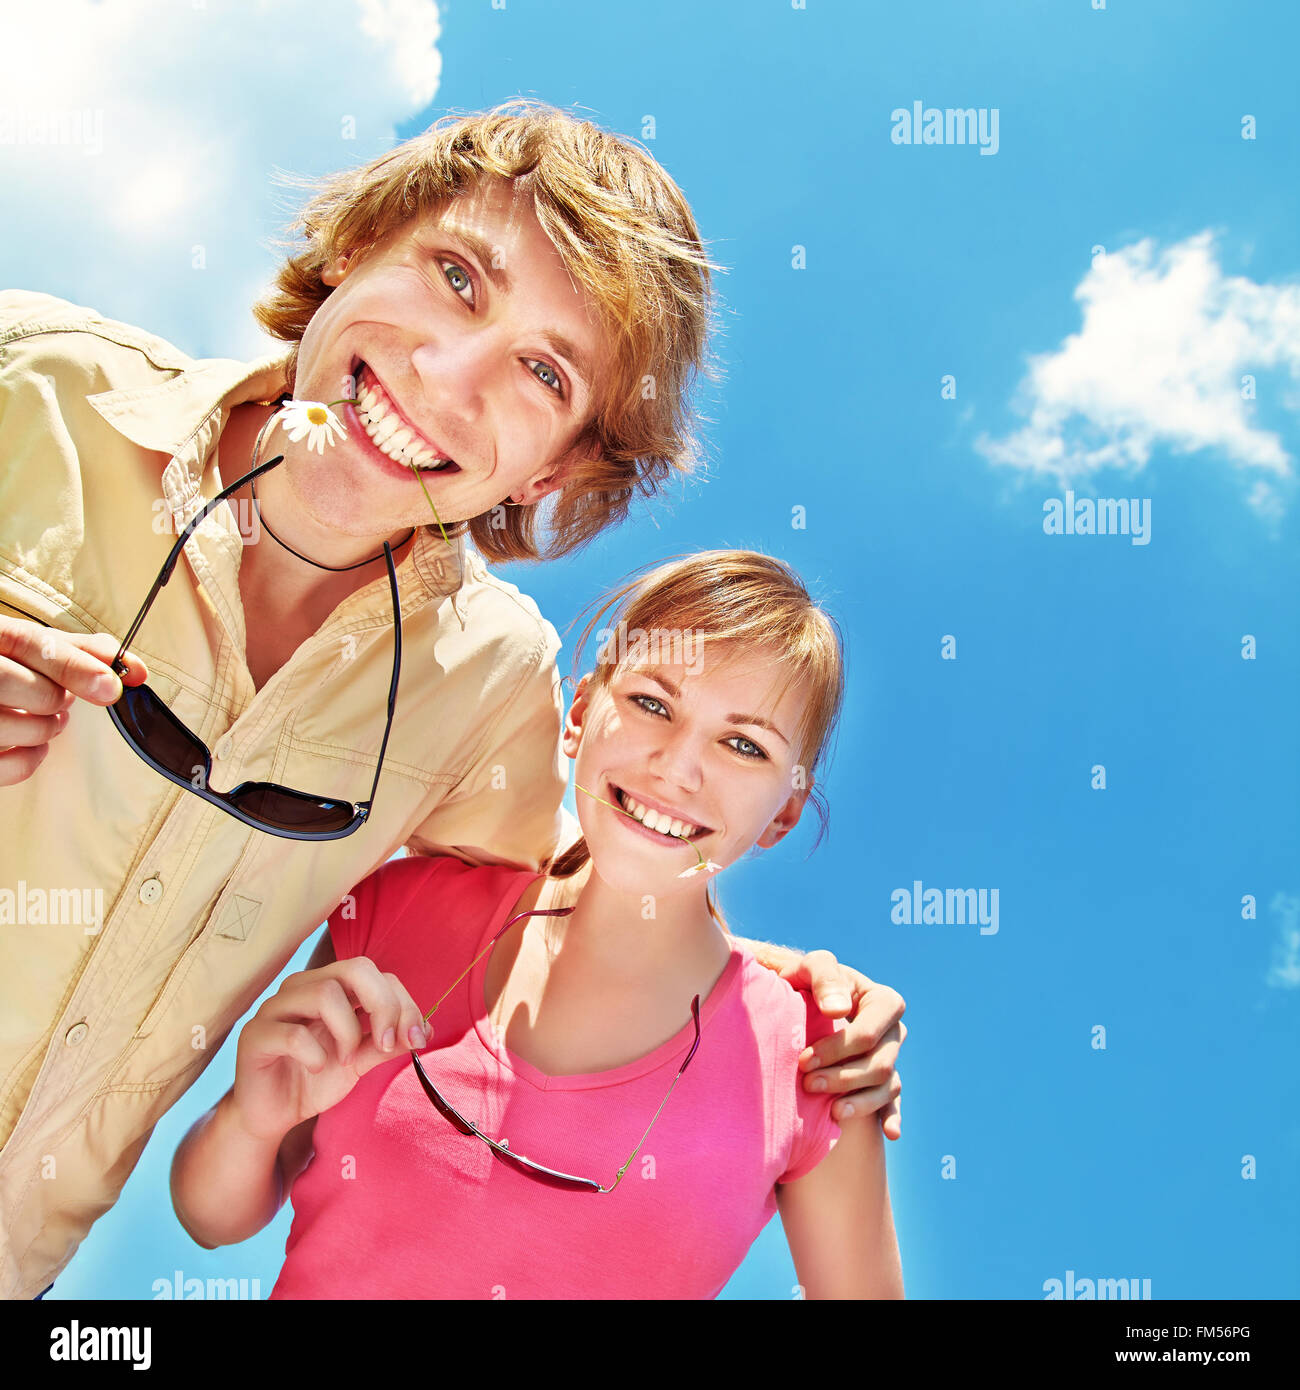 young people having fun outdoors Stock Photo